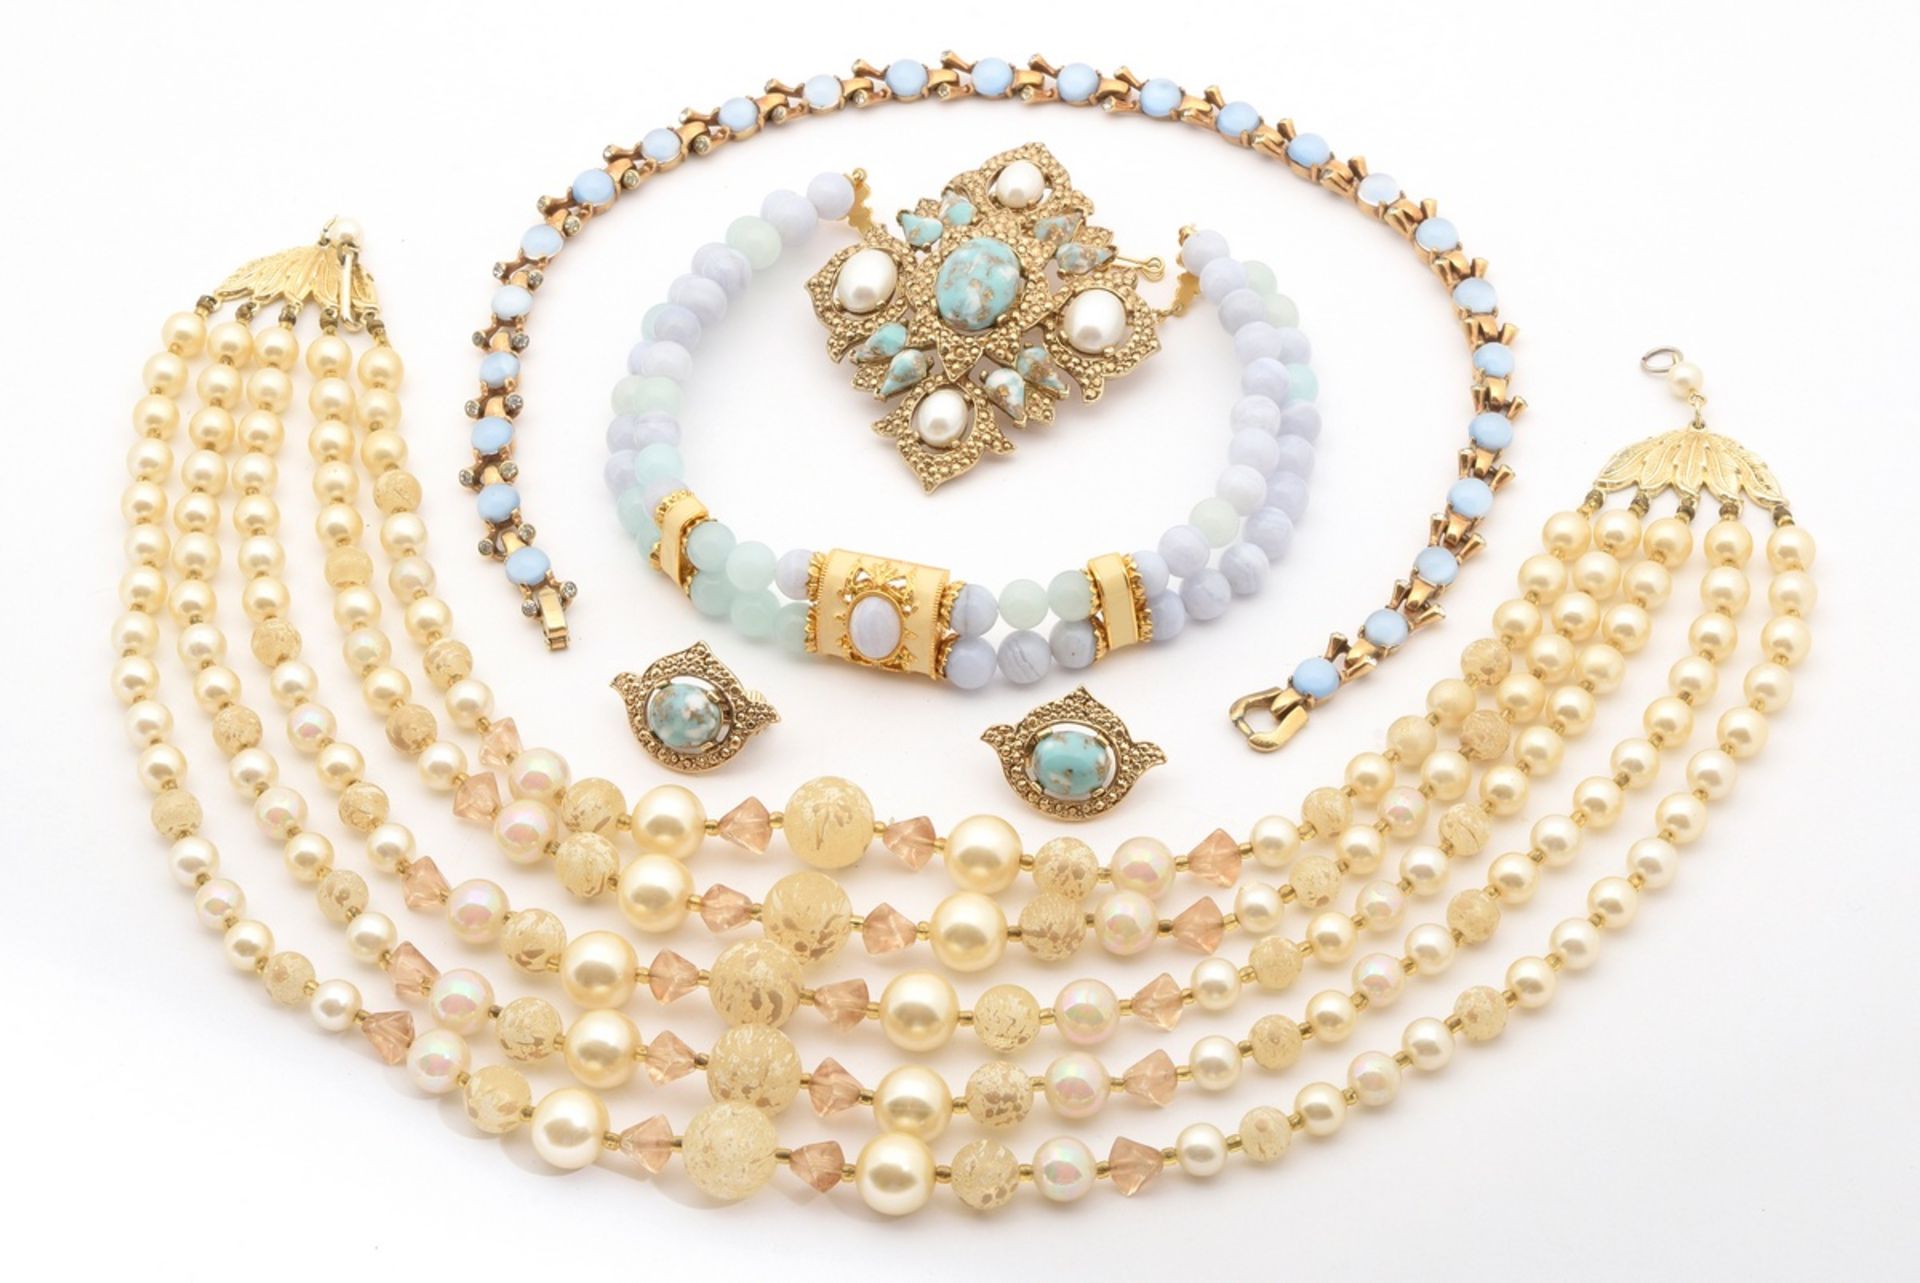 6 pieces of gold-plated light blue/beige fashion/costume jewellery made of glass and artificial pea - Image 2 of 12